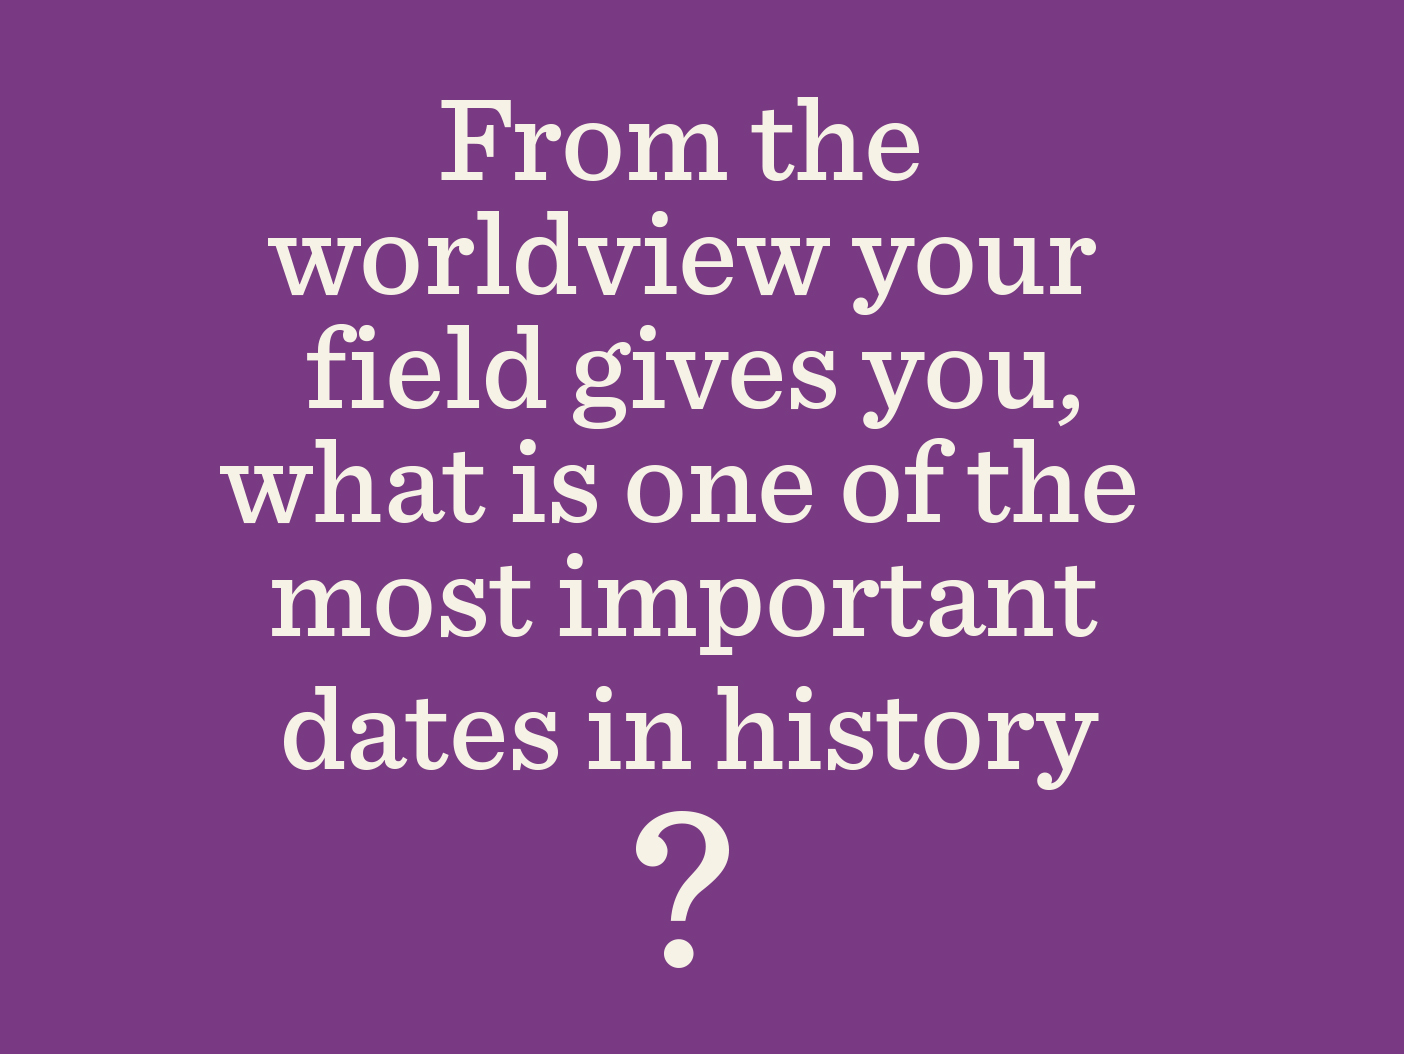 A purple box that reads "From the worldview your field gives you, what is one of the most important dates in history?"